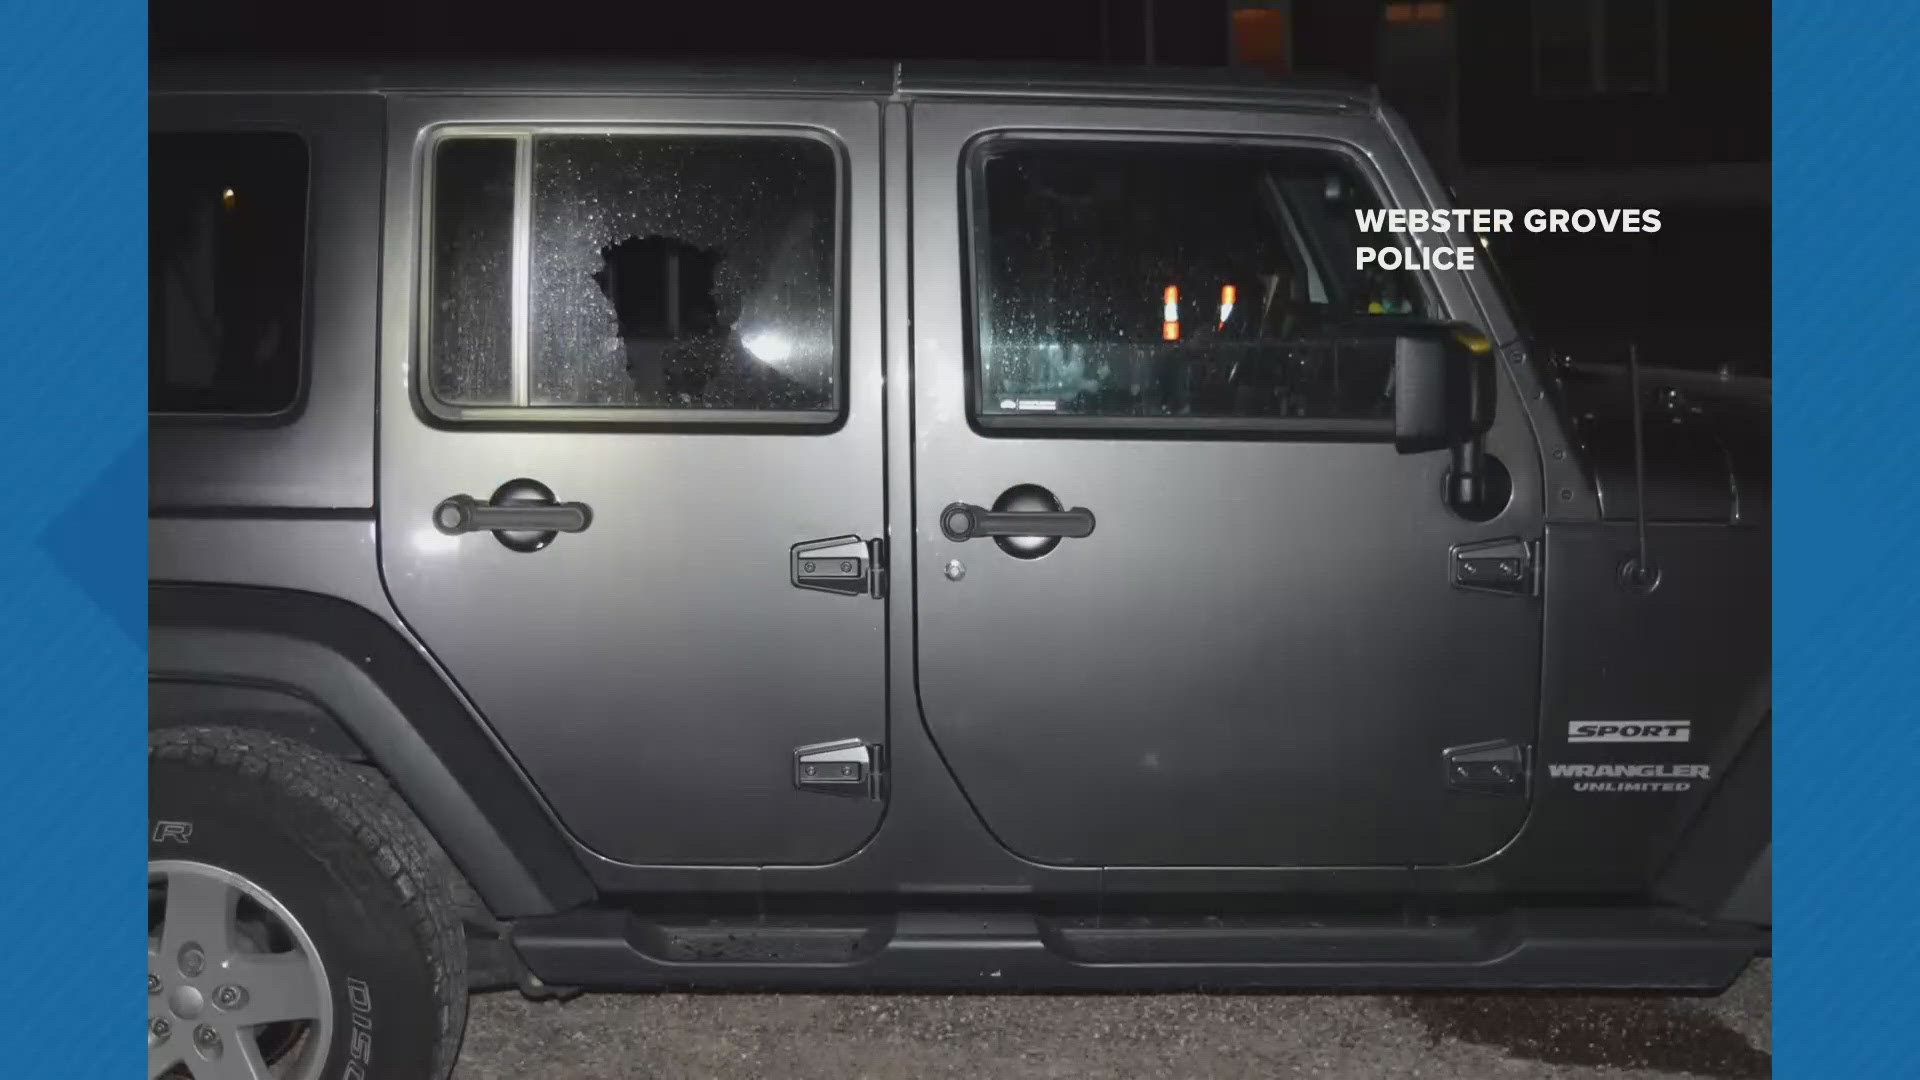 A man is facing felony charges after police say he shot a BB gun at another driver this week. The road rage shooting left the victim unsettled.